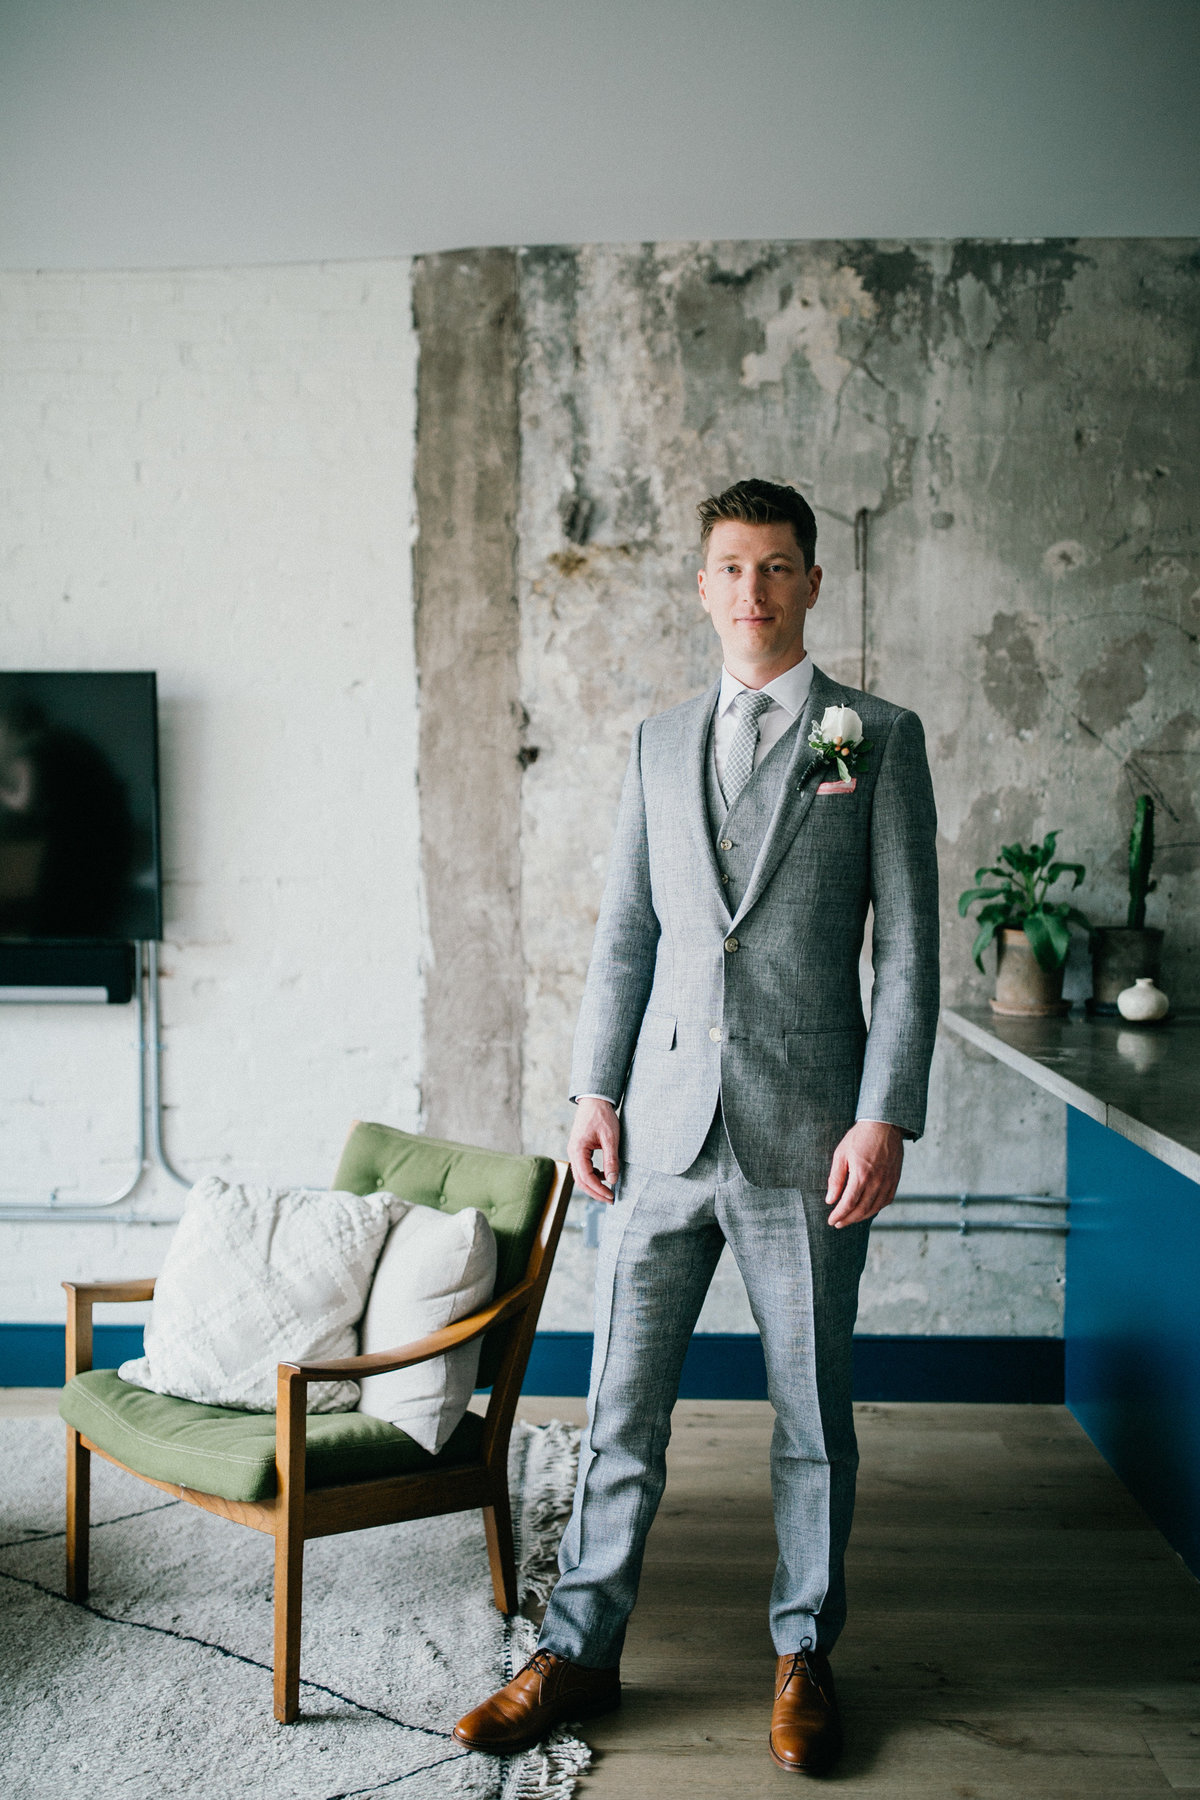 Handsome groom getting ready at Lokal Hotel in Old City before the wedding.